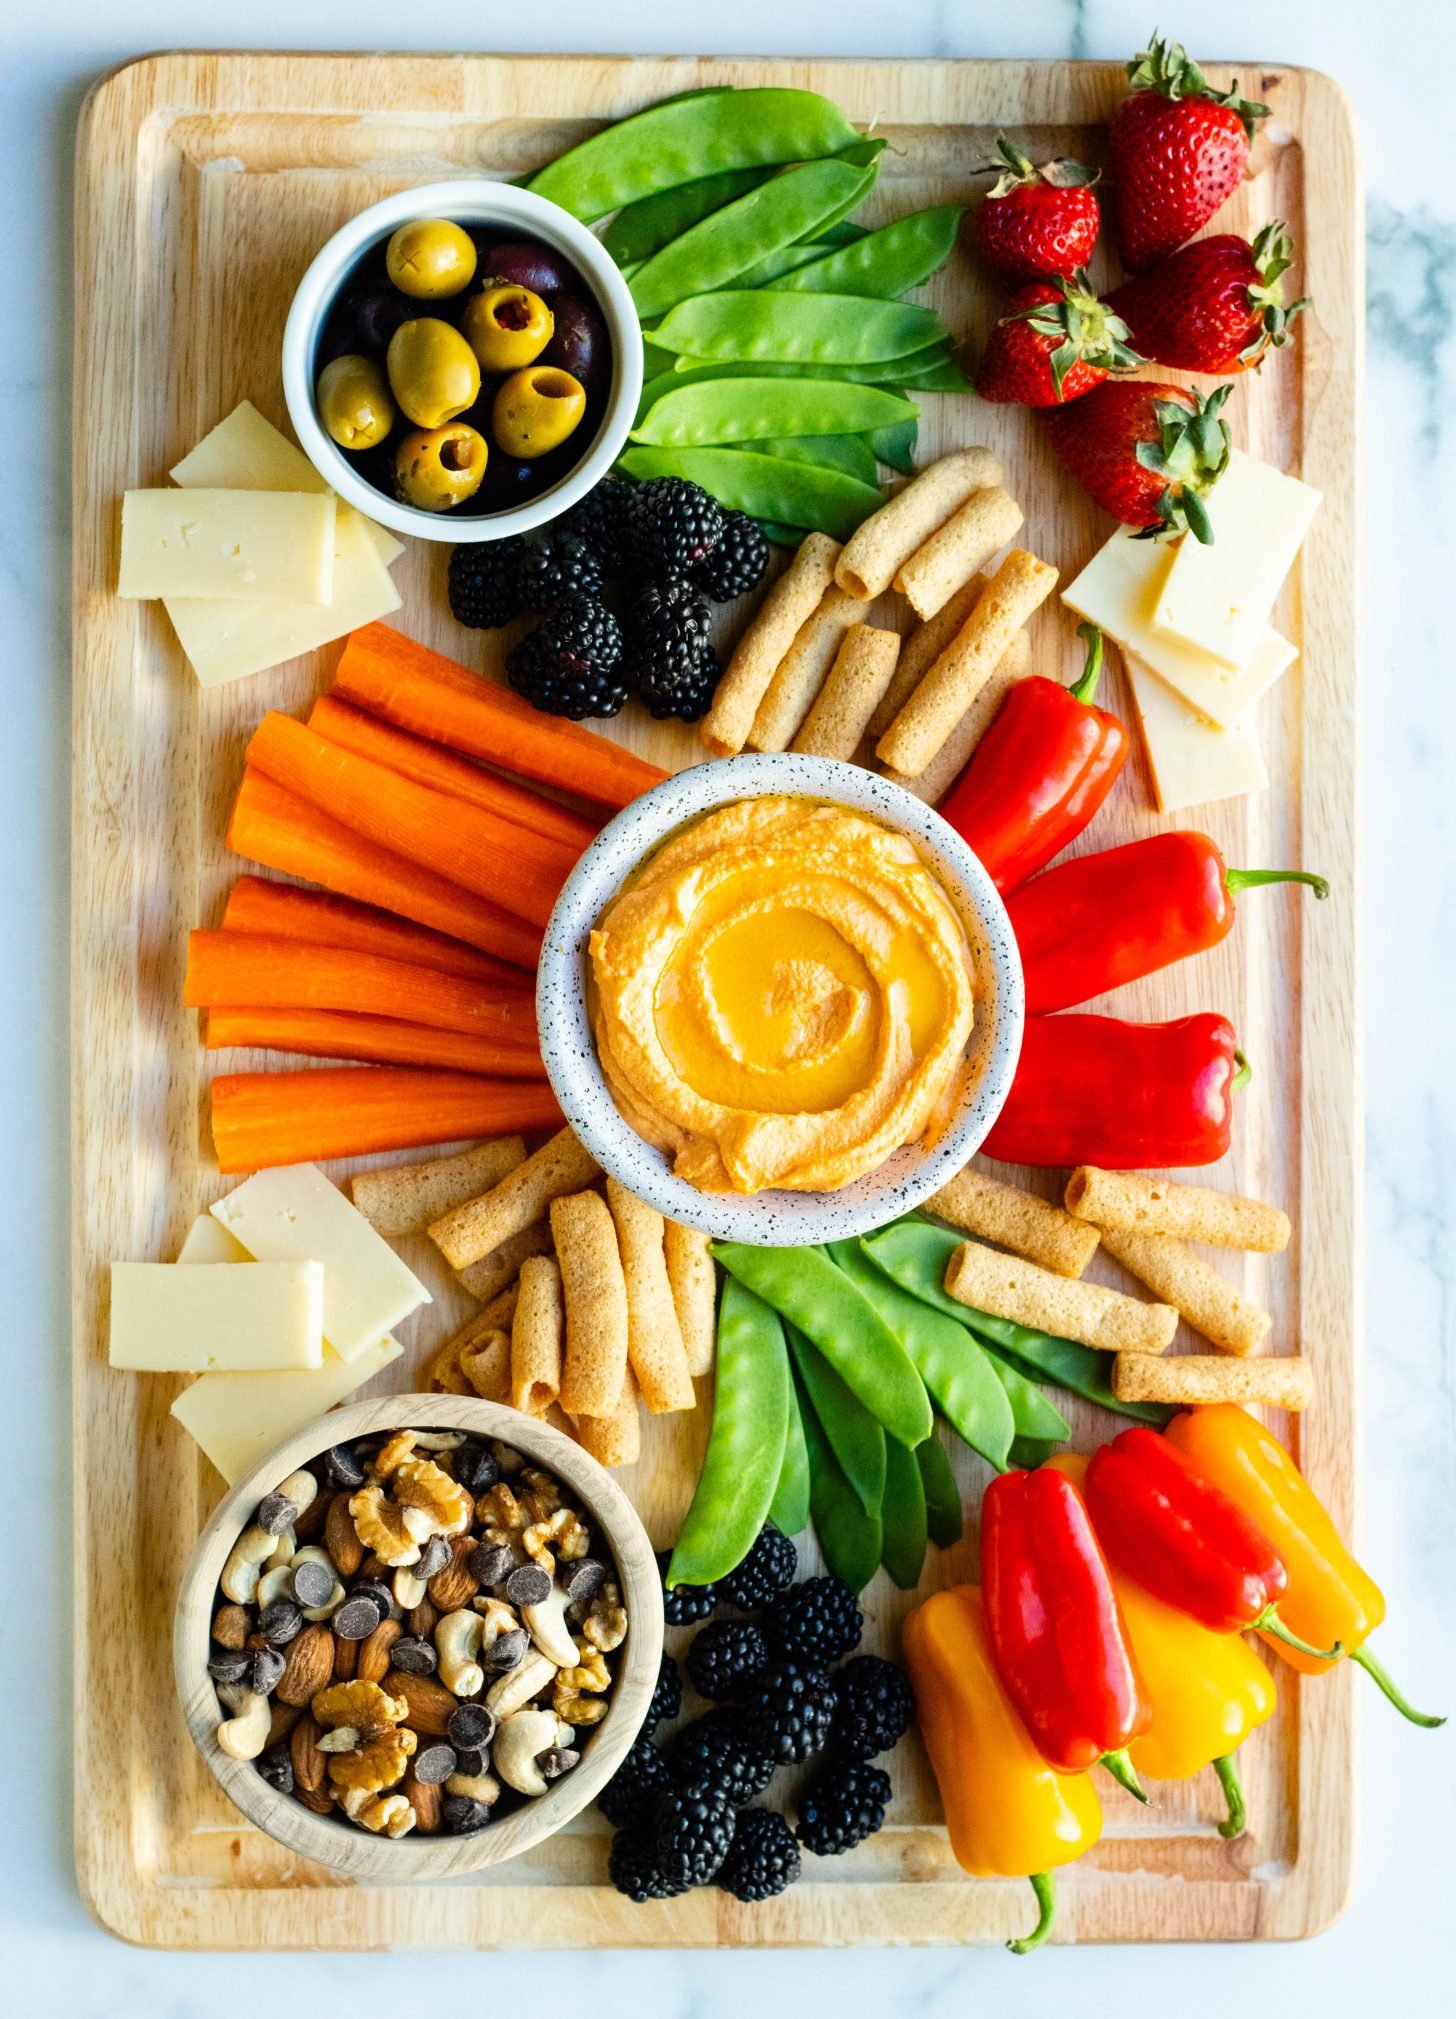 How to Make a Healthy Snack Board • Daisybeet